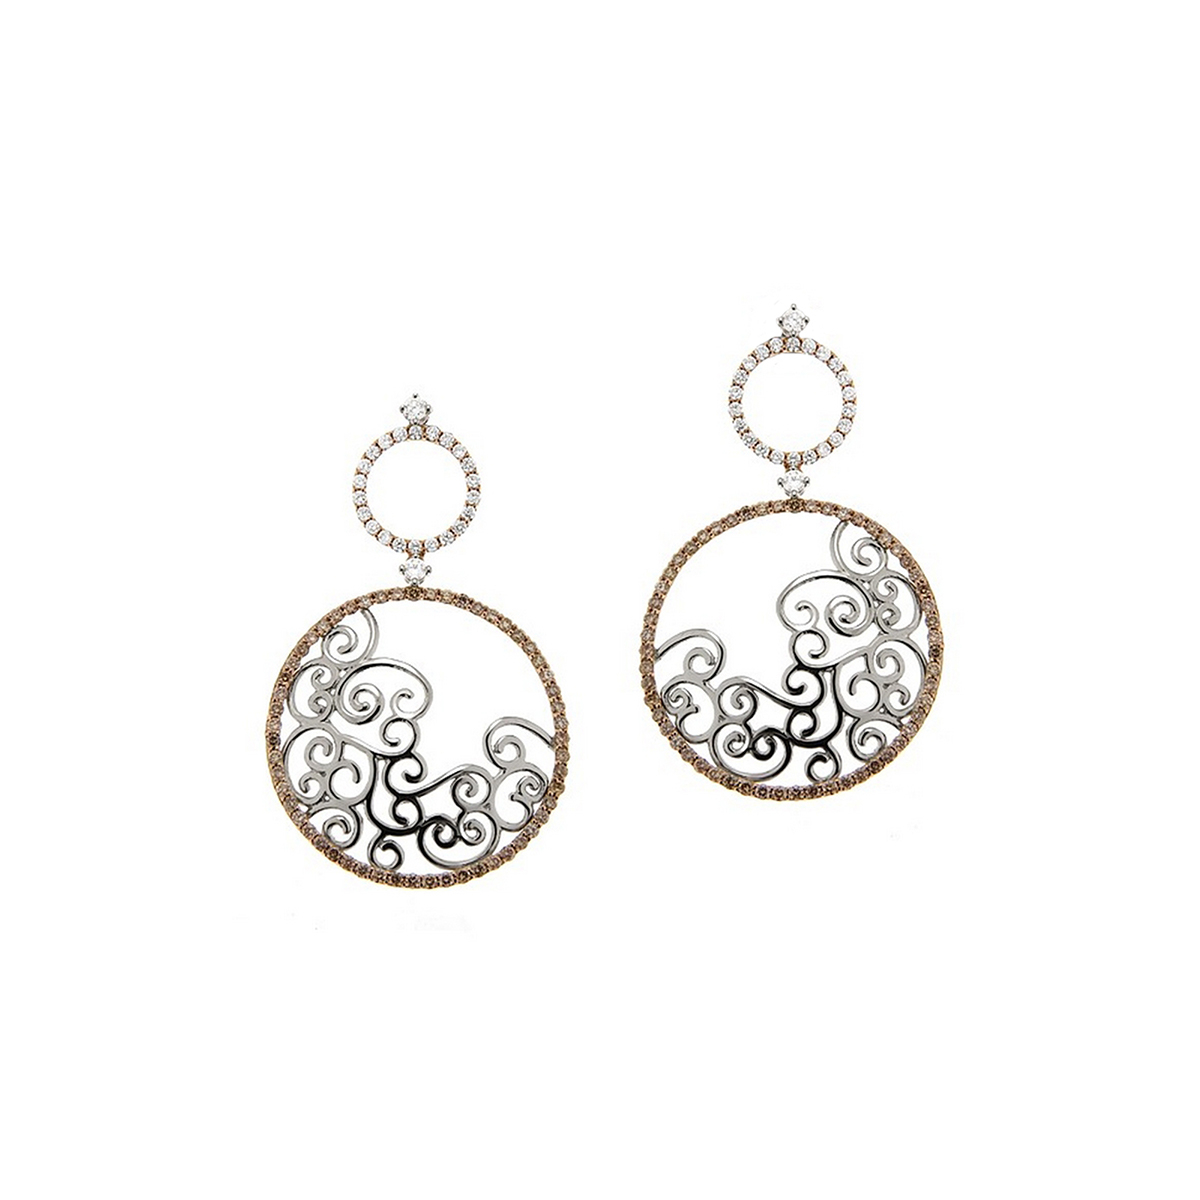 18 K Rose and White Gold Twirl Circle Earrings with White and Brown Diamonds